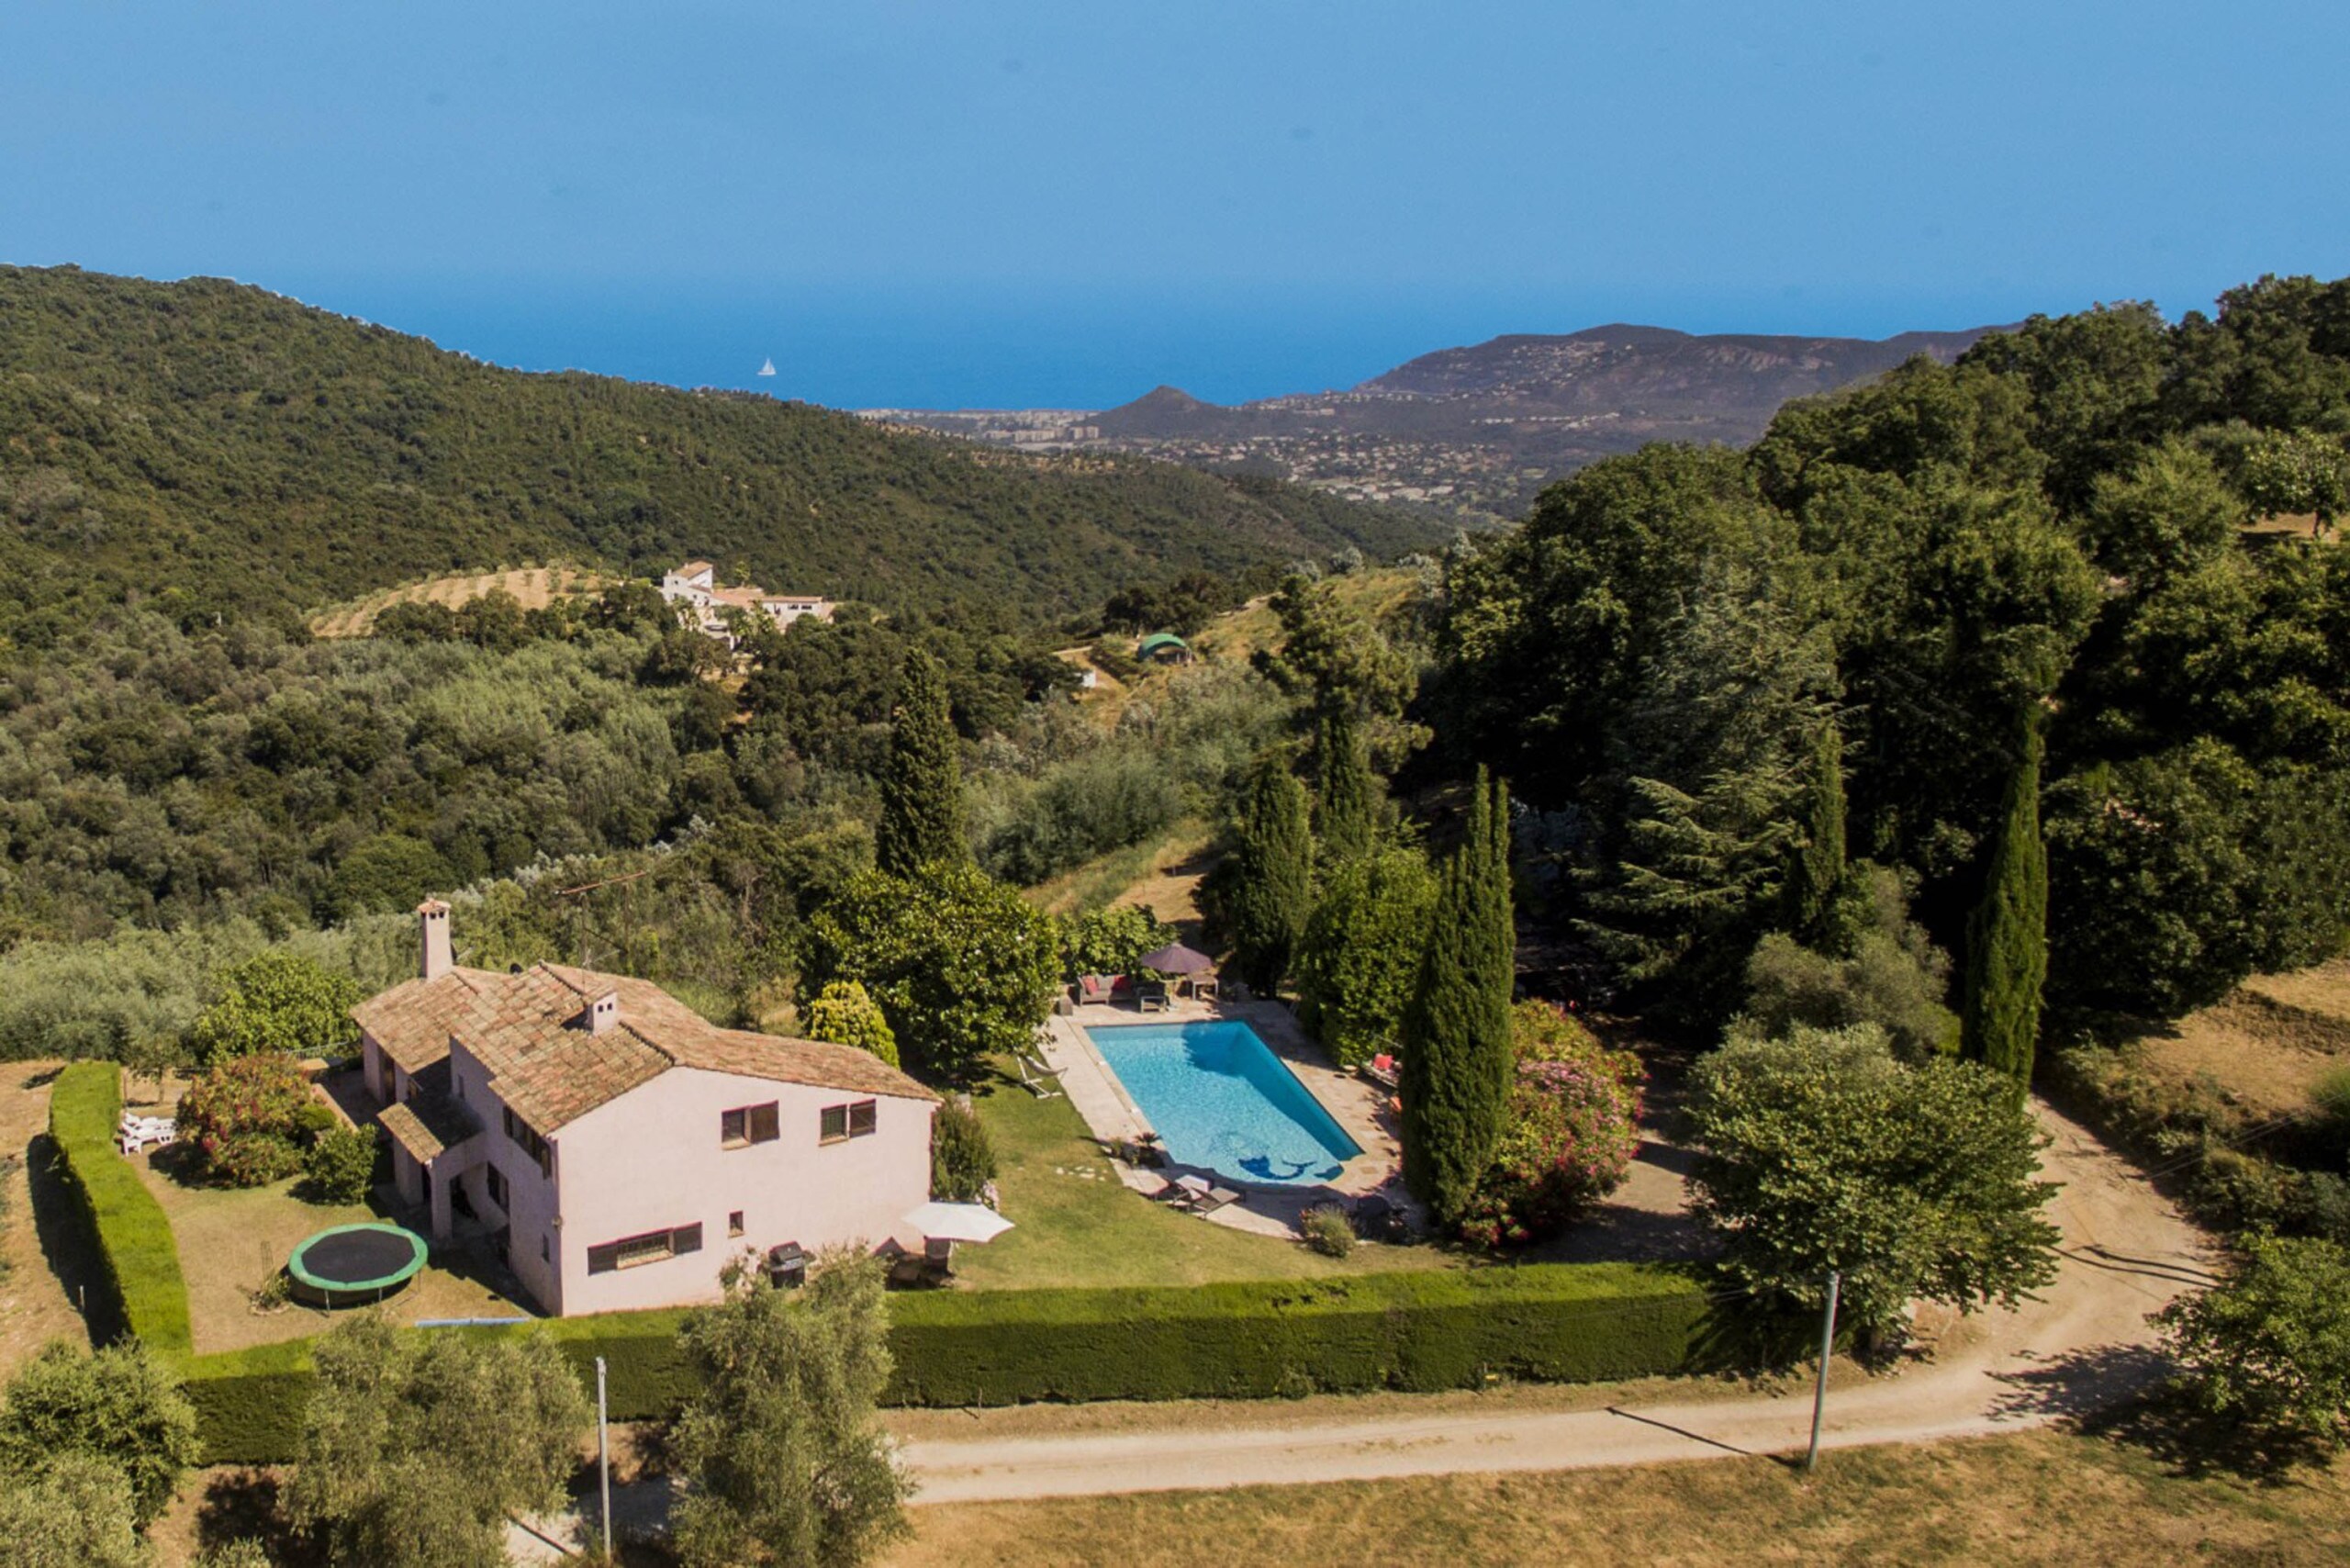 A stunning aerial view showcasing our villa, the spacious pool, and the breathtaking view of the Bay of Cannes.